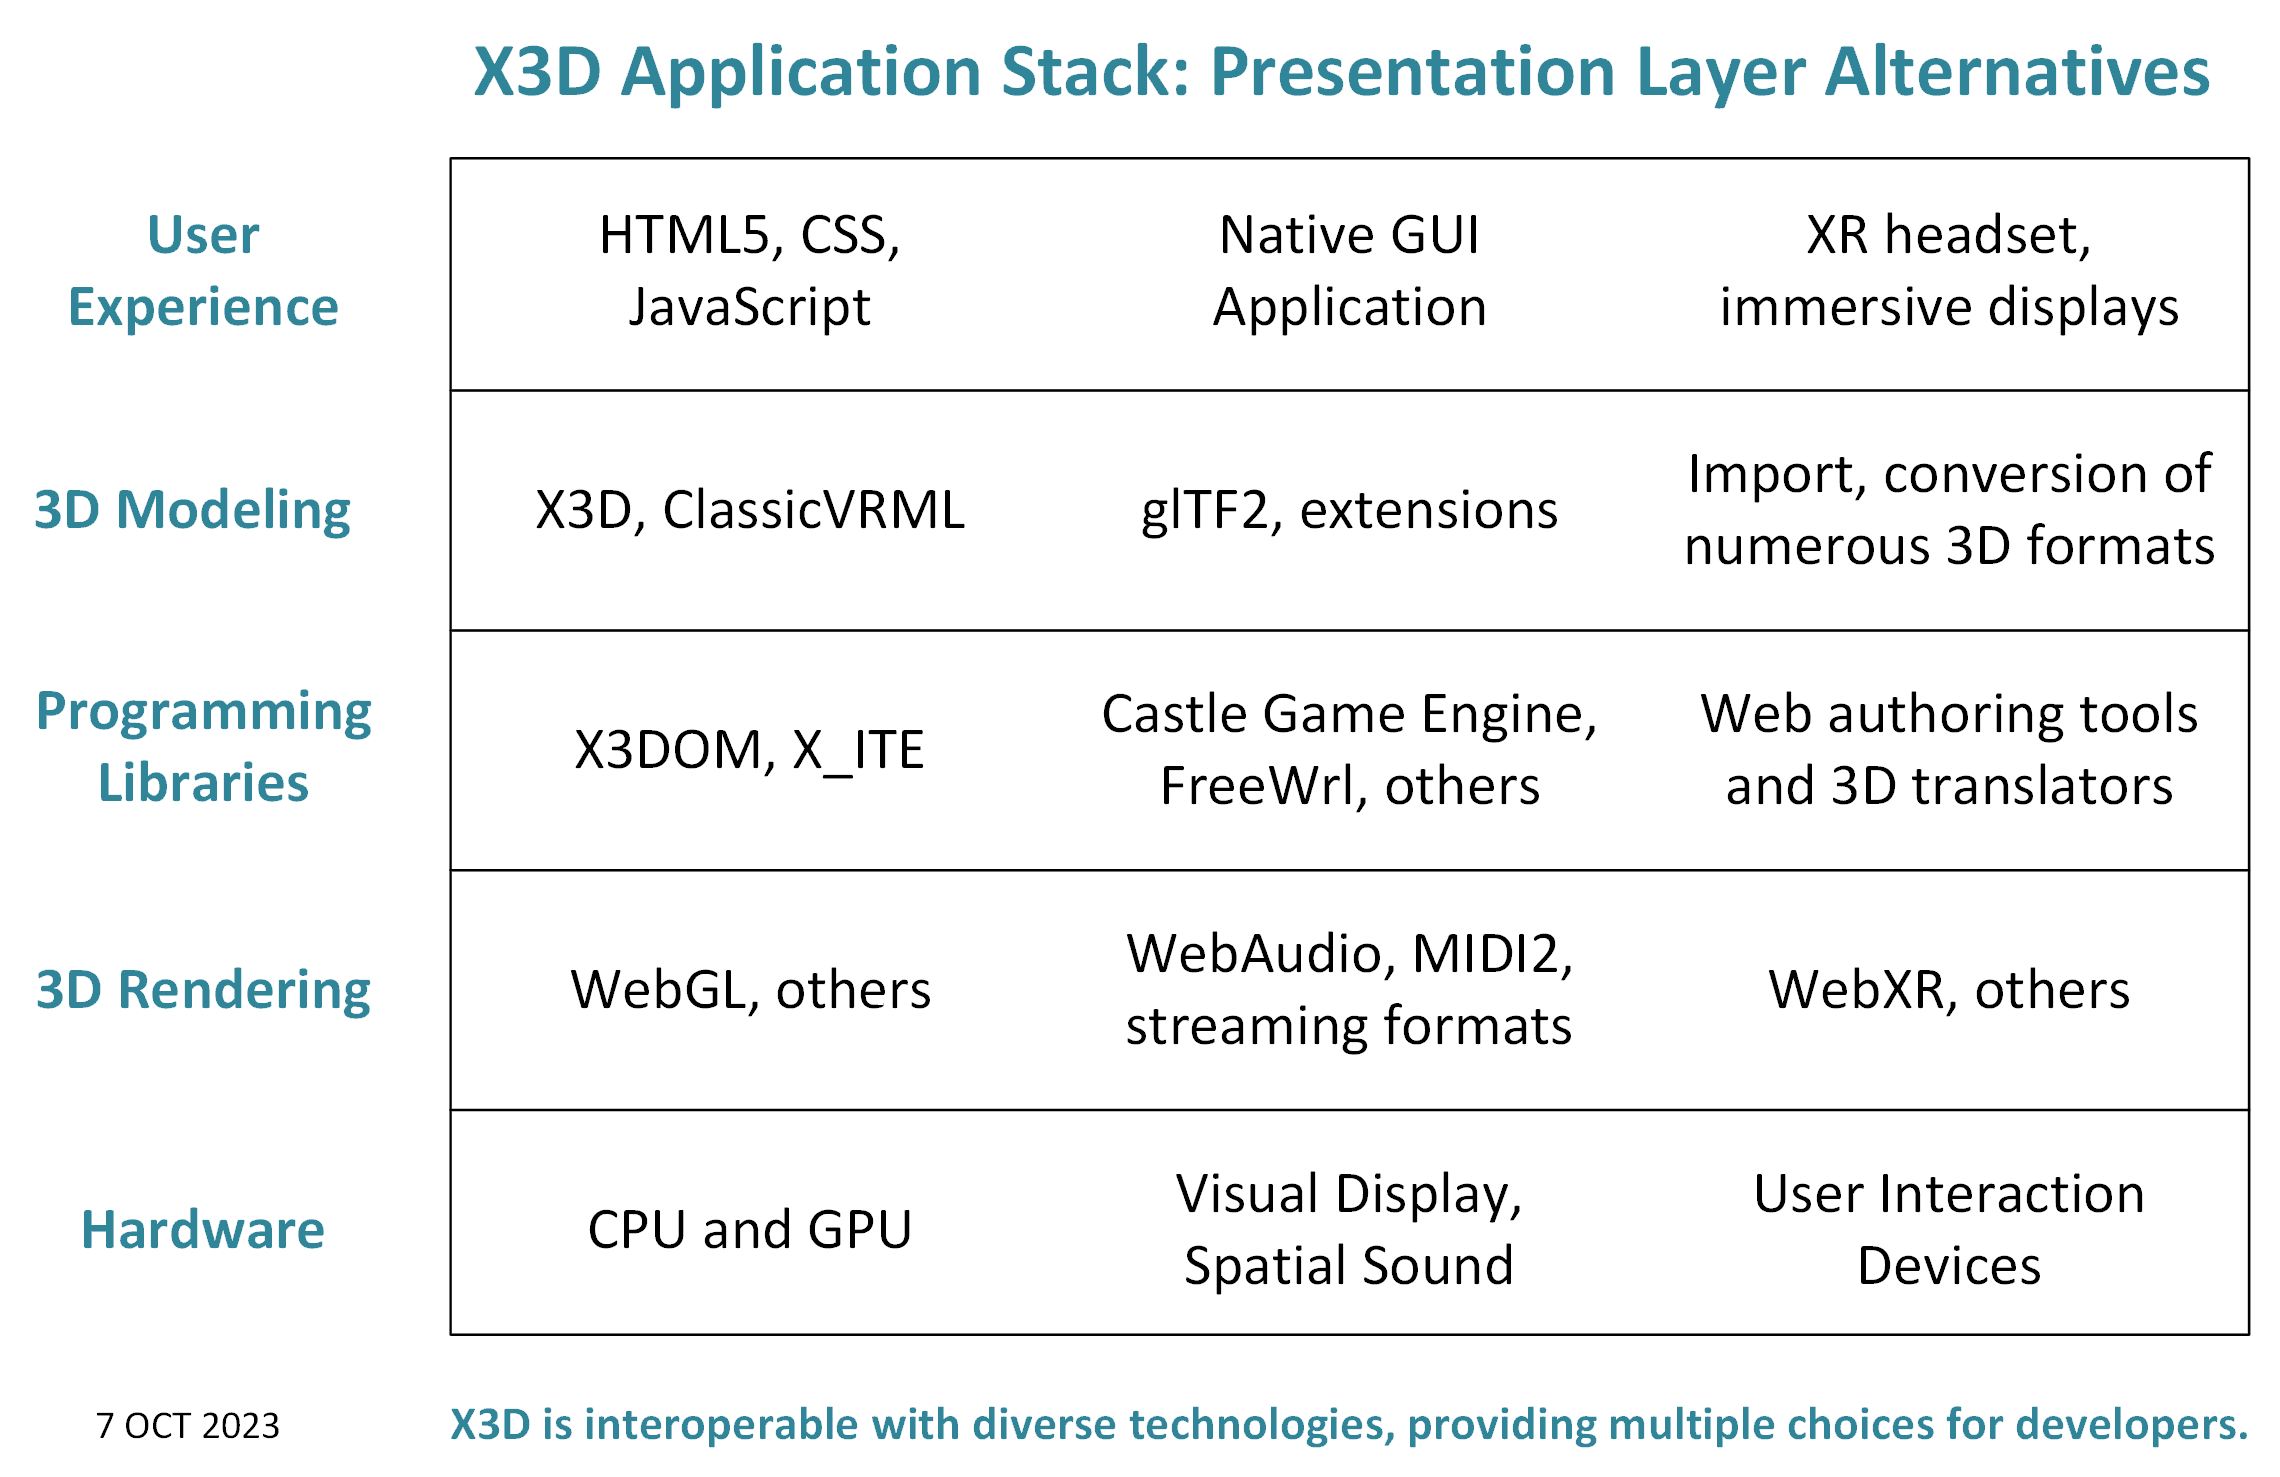 X3D Application Stack Layers Alternatives